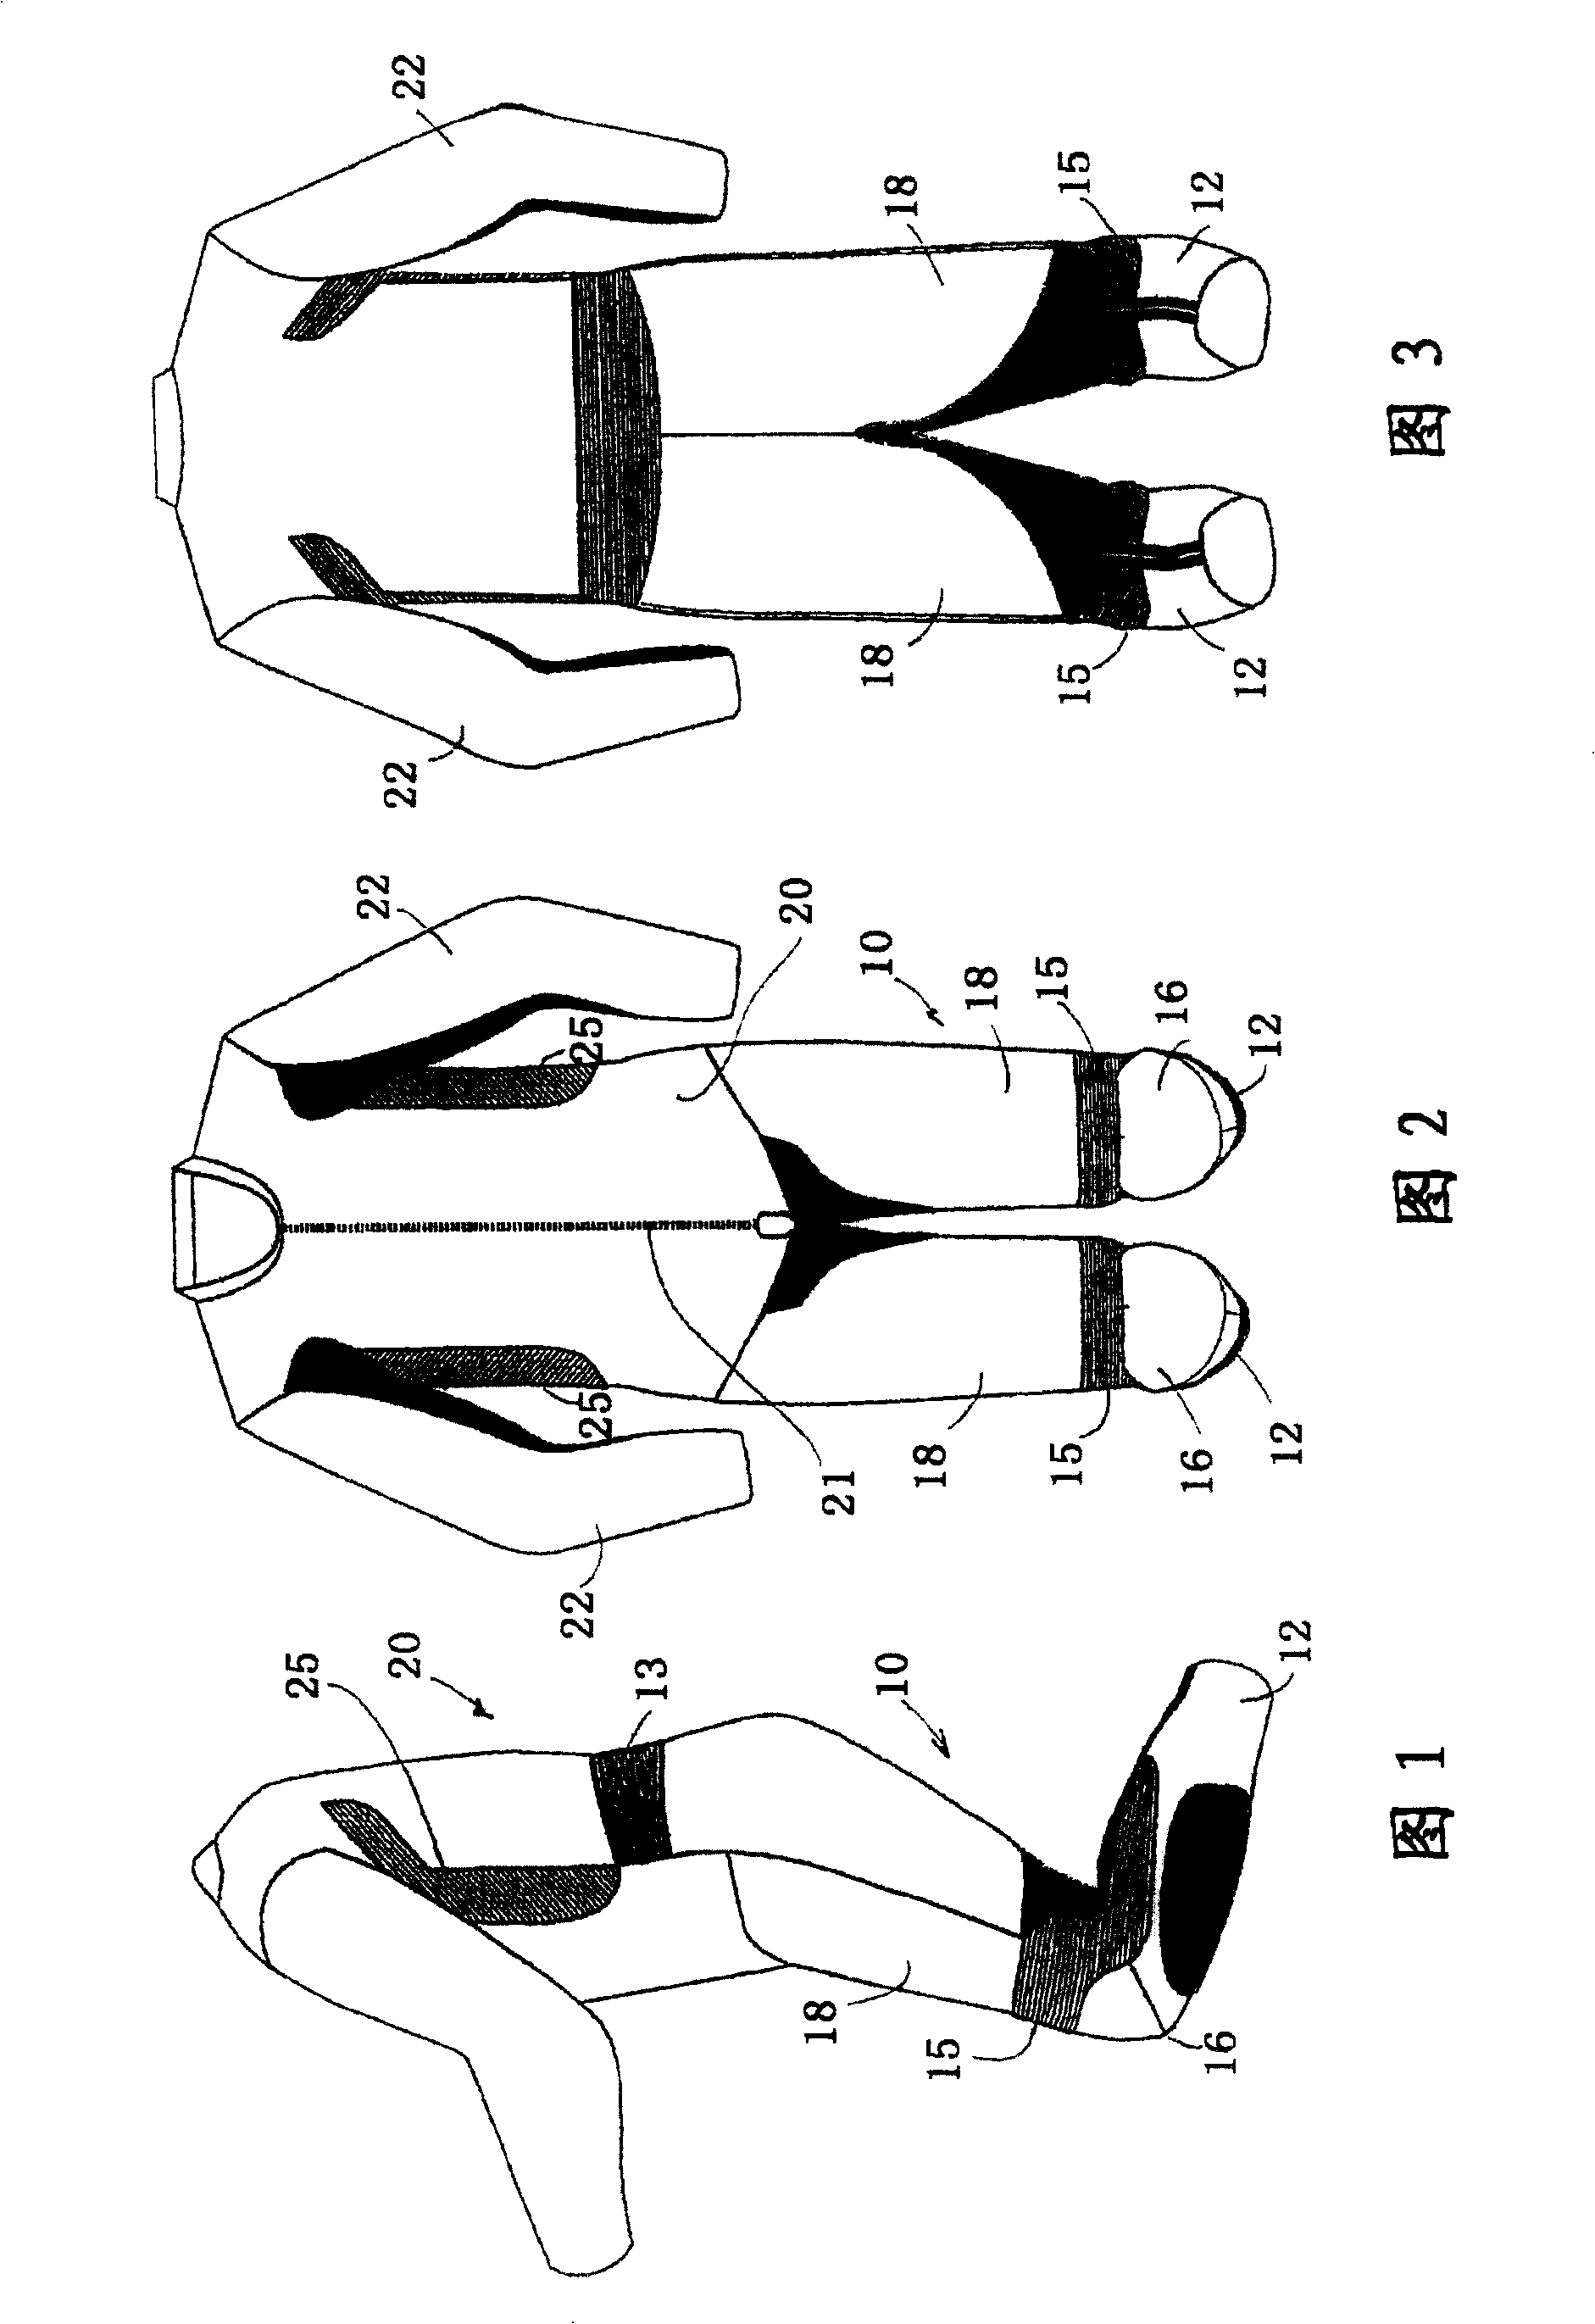 Garment for motorcyclists with improved comfort